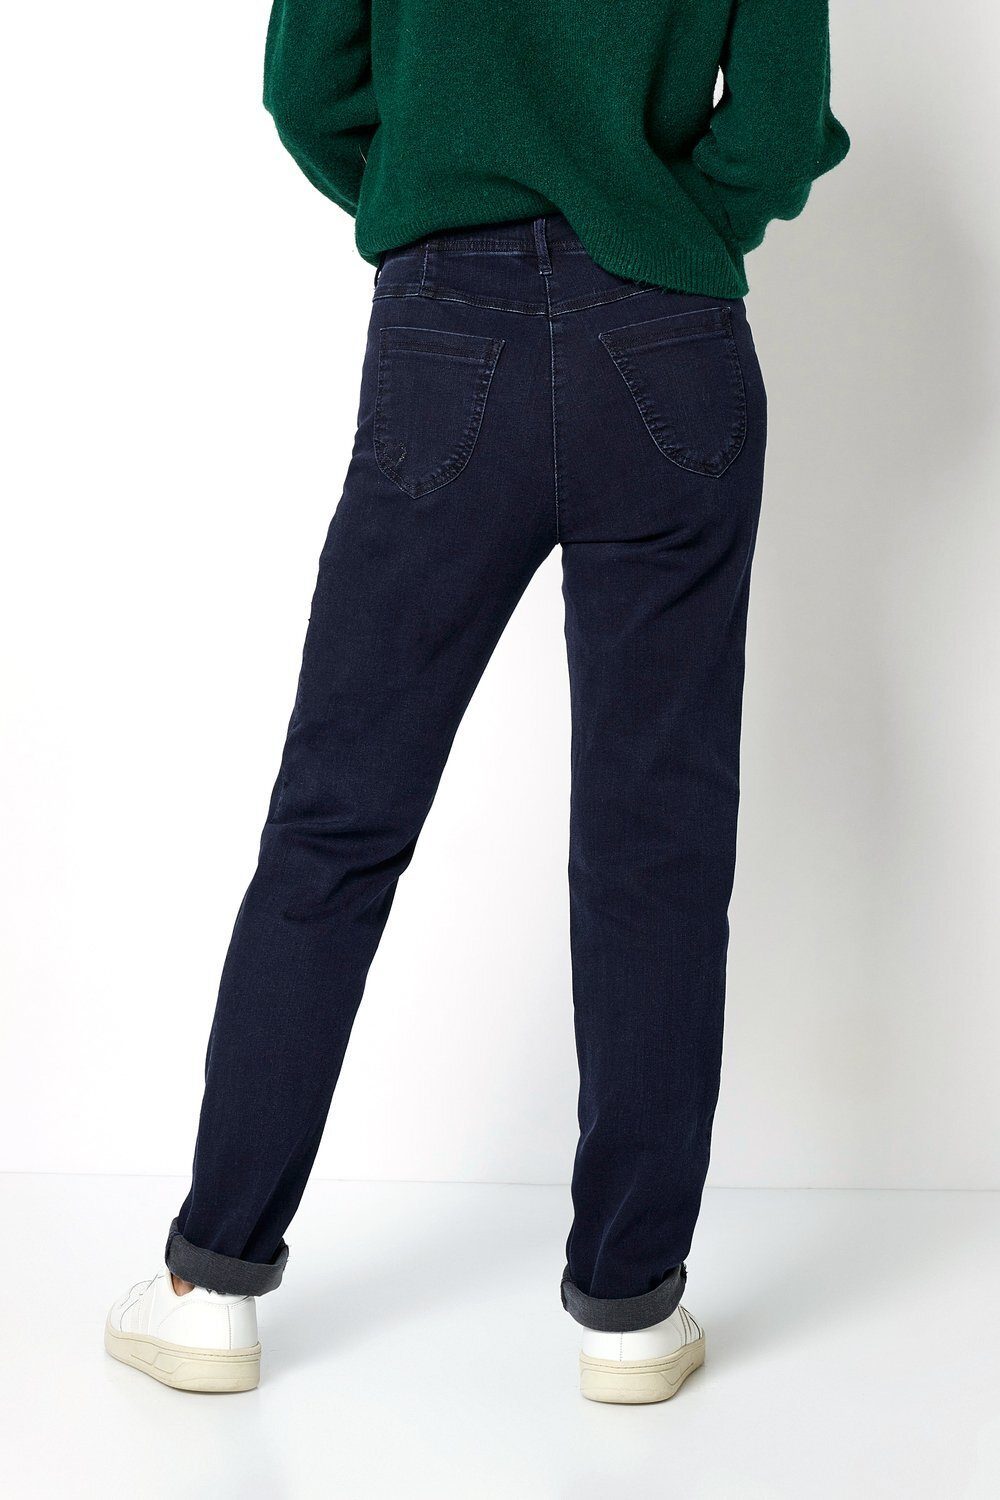 058 dunkelblau - Love Relaxed legerer in My 5-Pocket-Jeans by TONI Passform